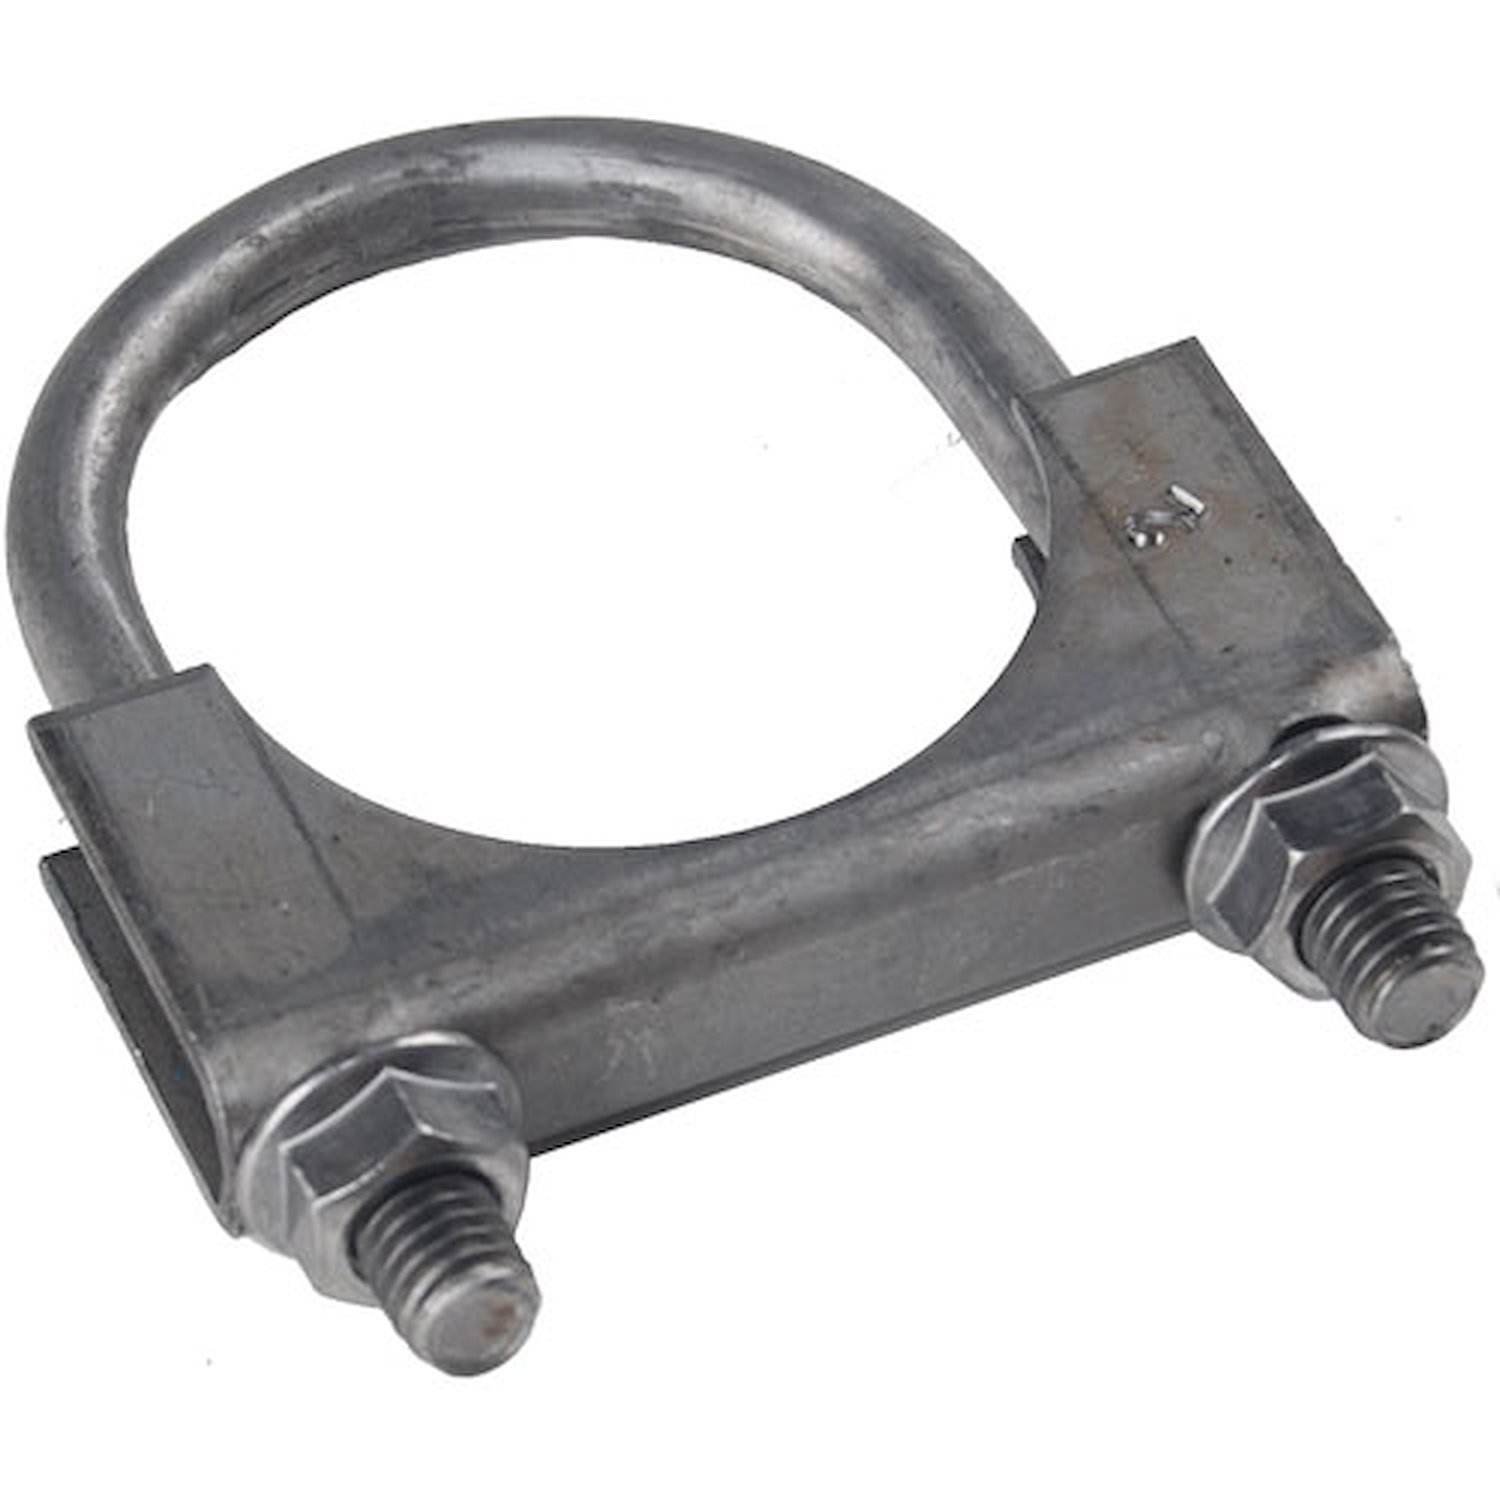 Steel U-Clamp for 1-1/4